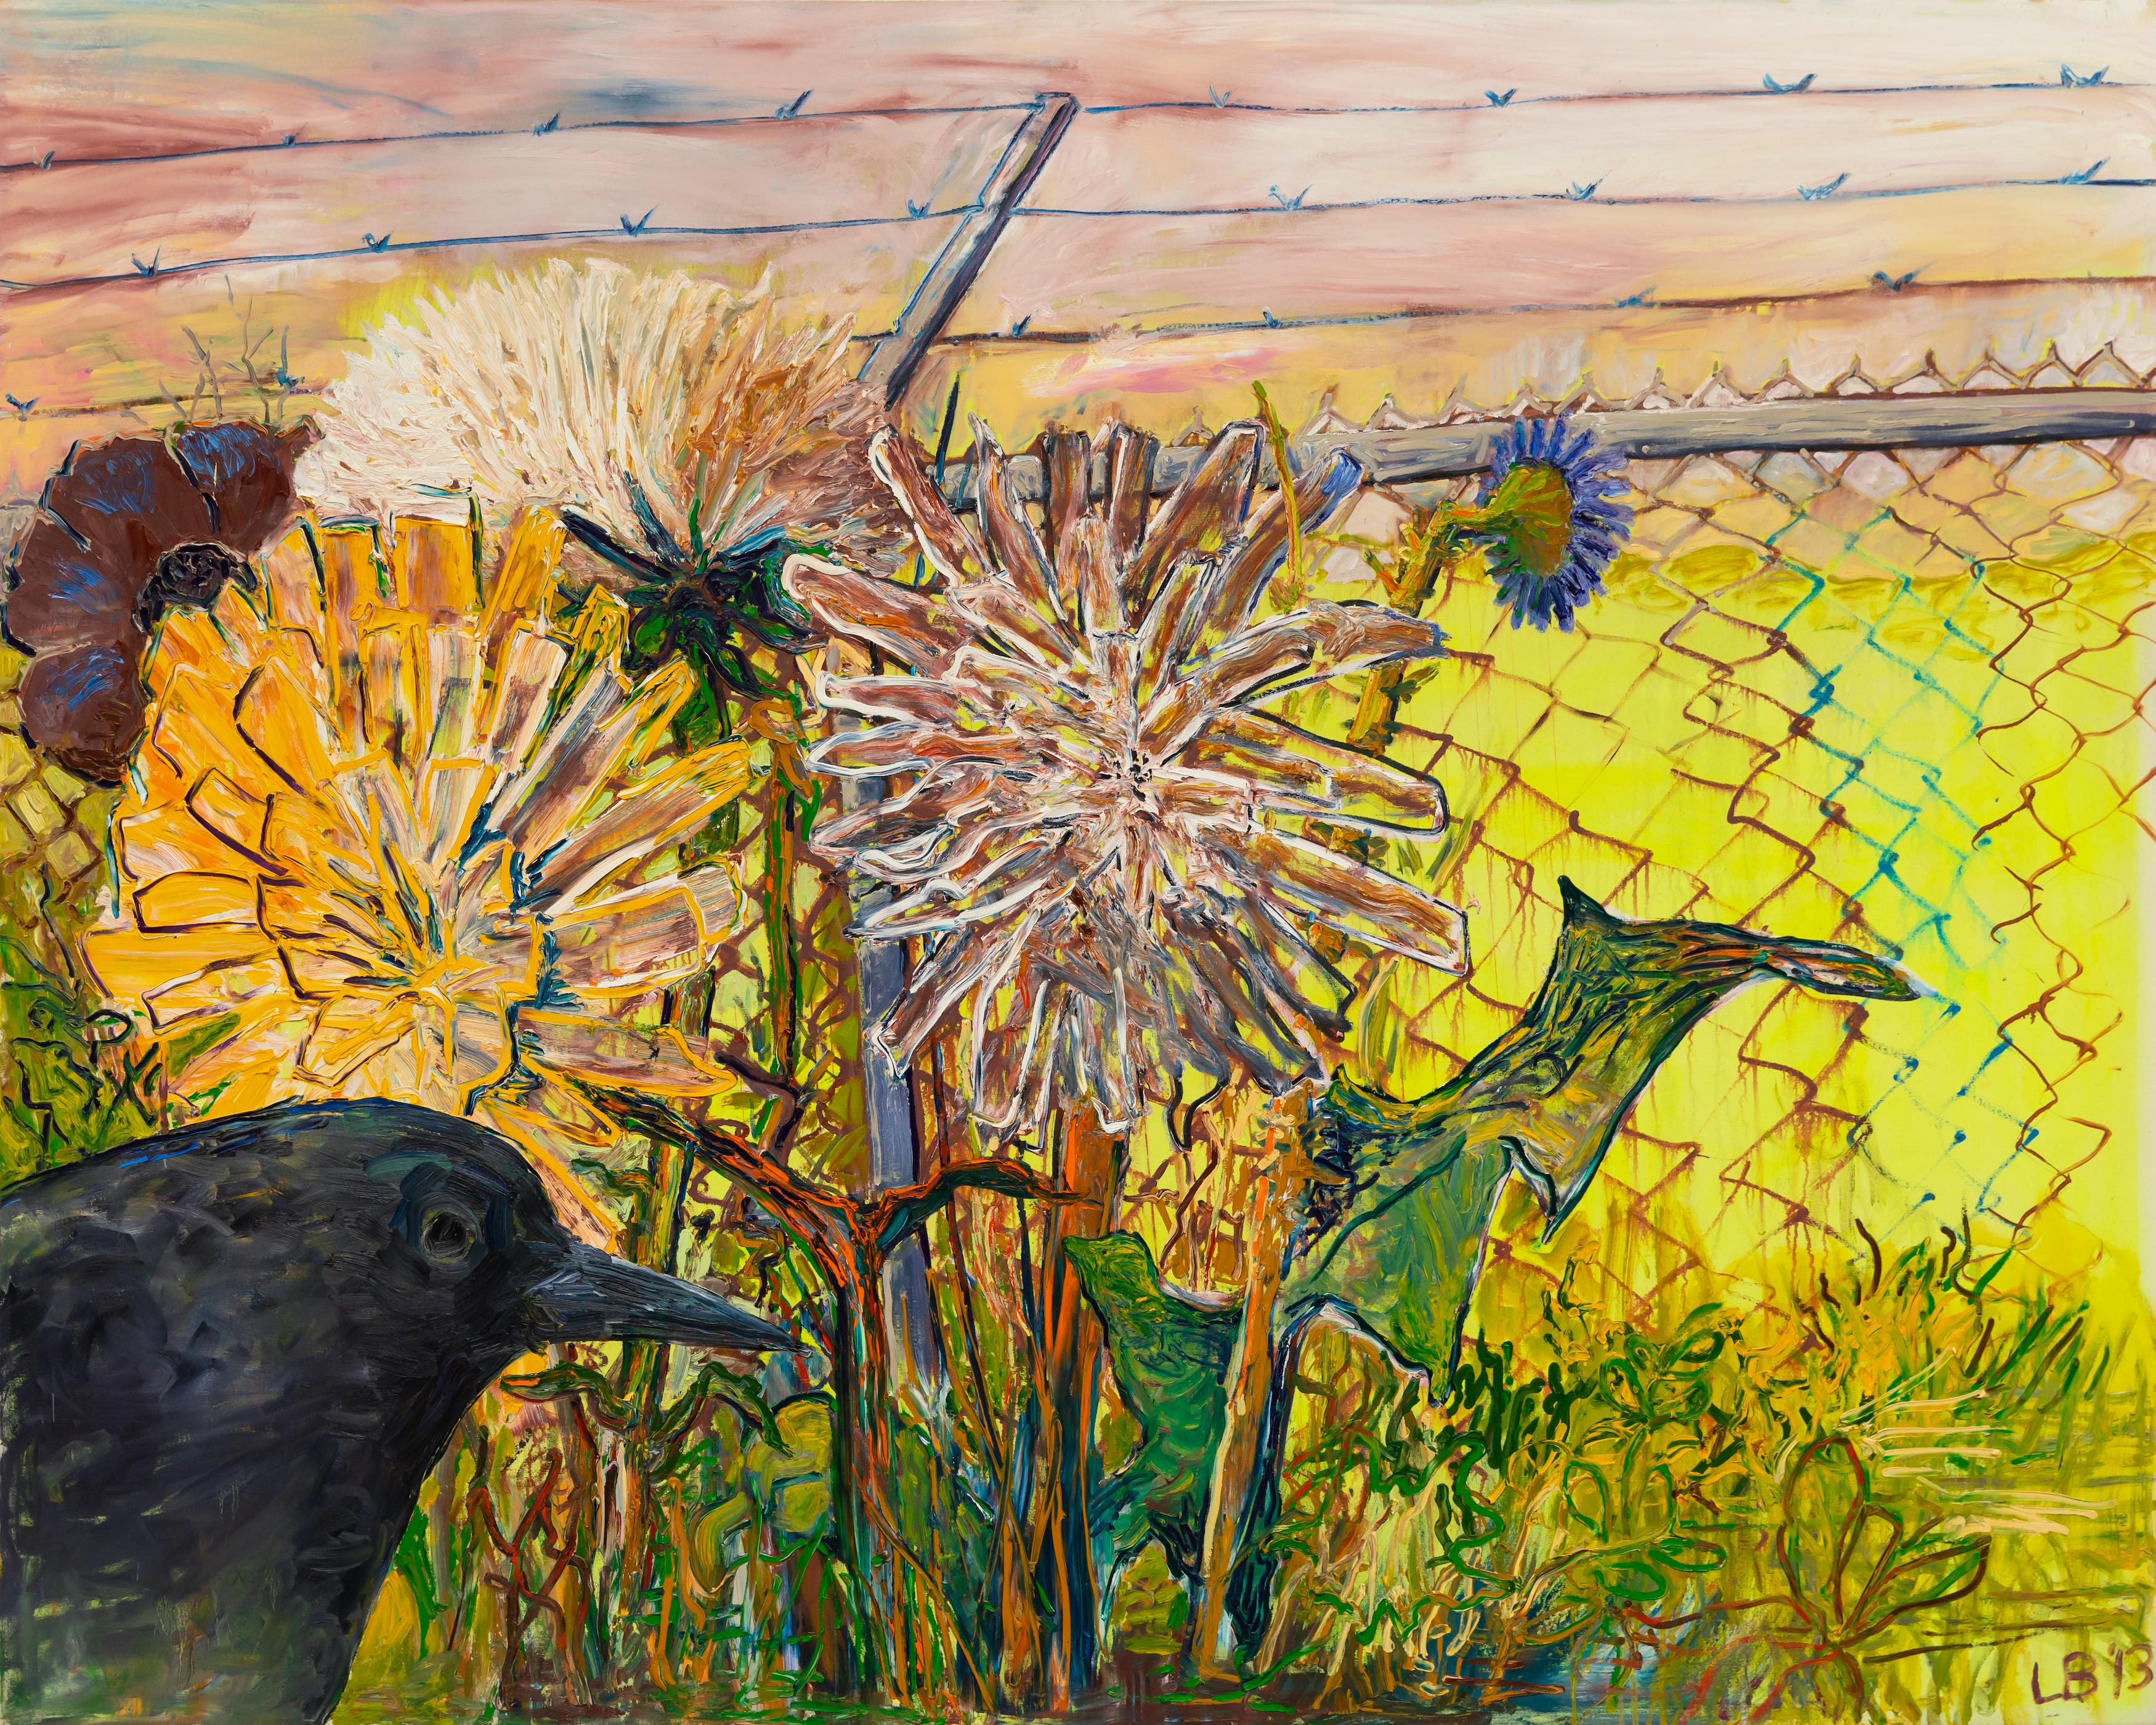 Leslie Bostrom Figurative Painting - Blackbird and Fence, Oil on Canvas, 2013